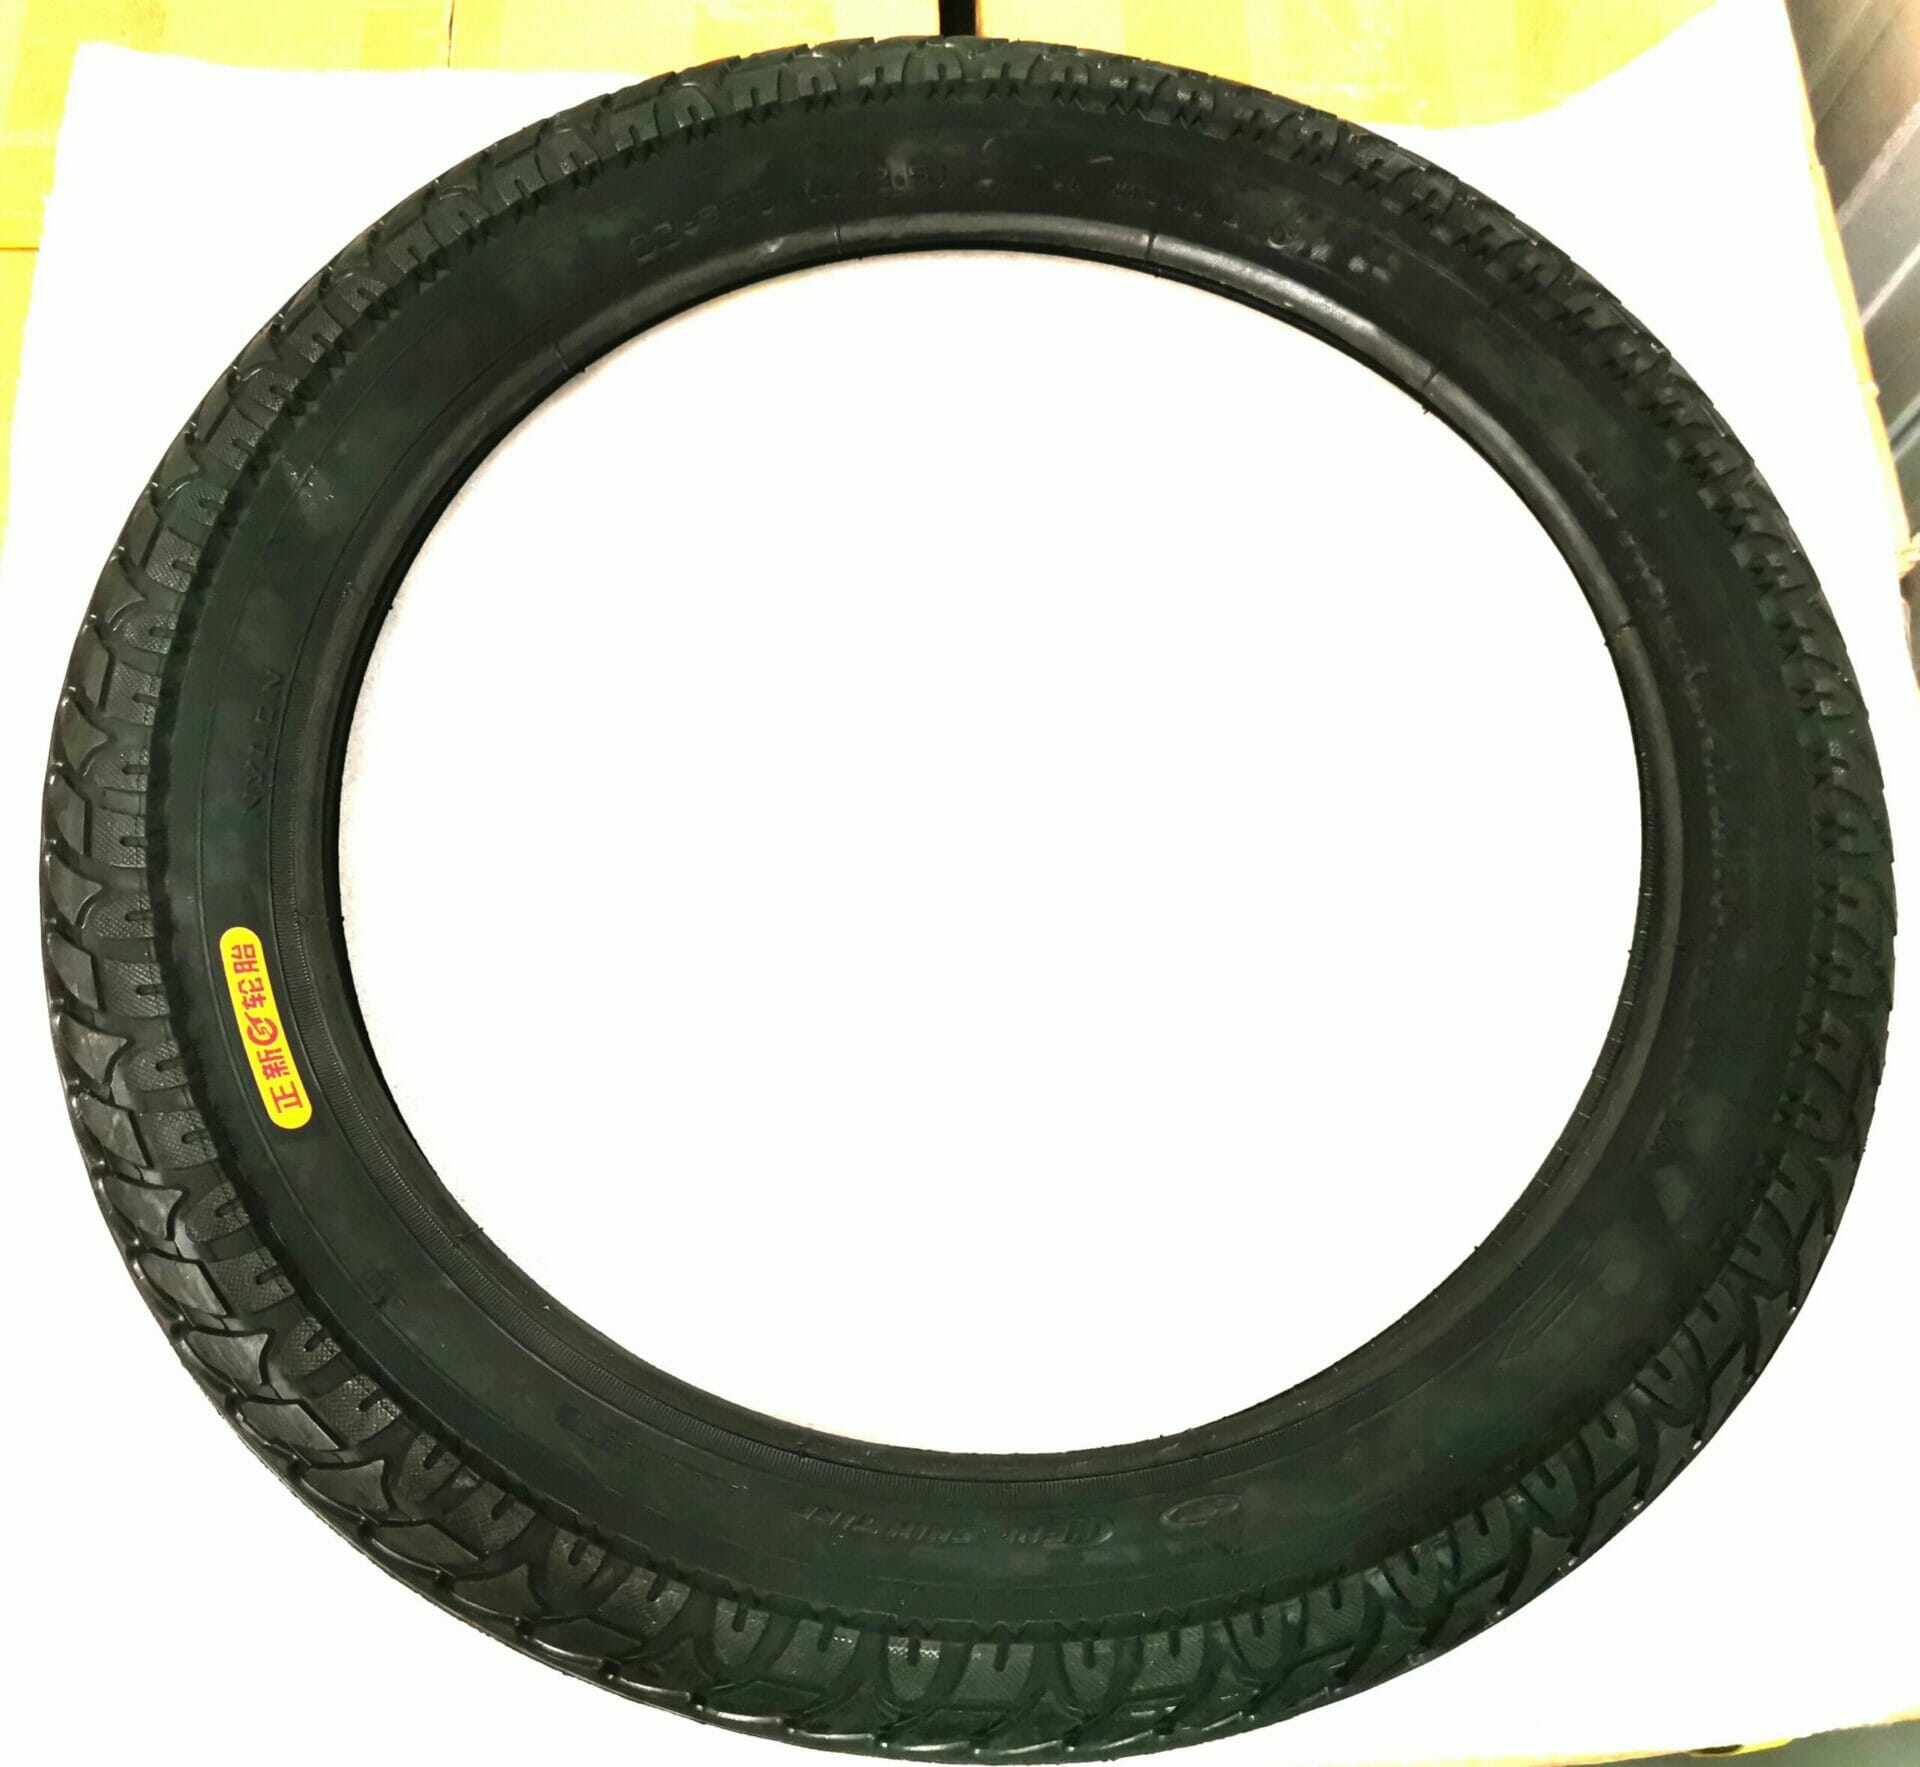 Kingsong_18L_electric_unicycle_tyre